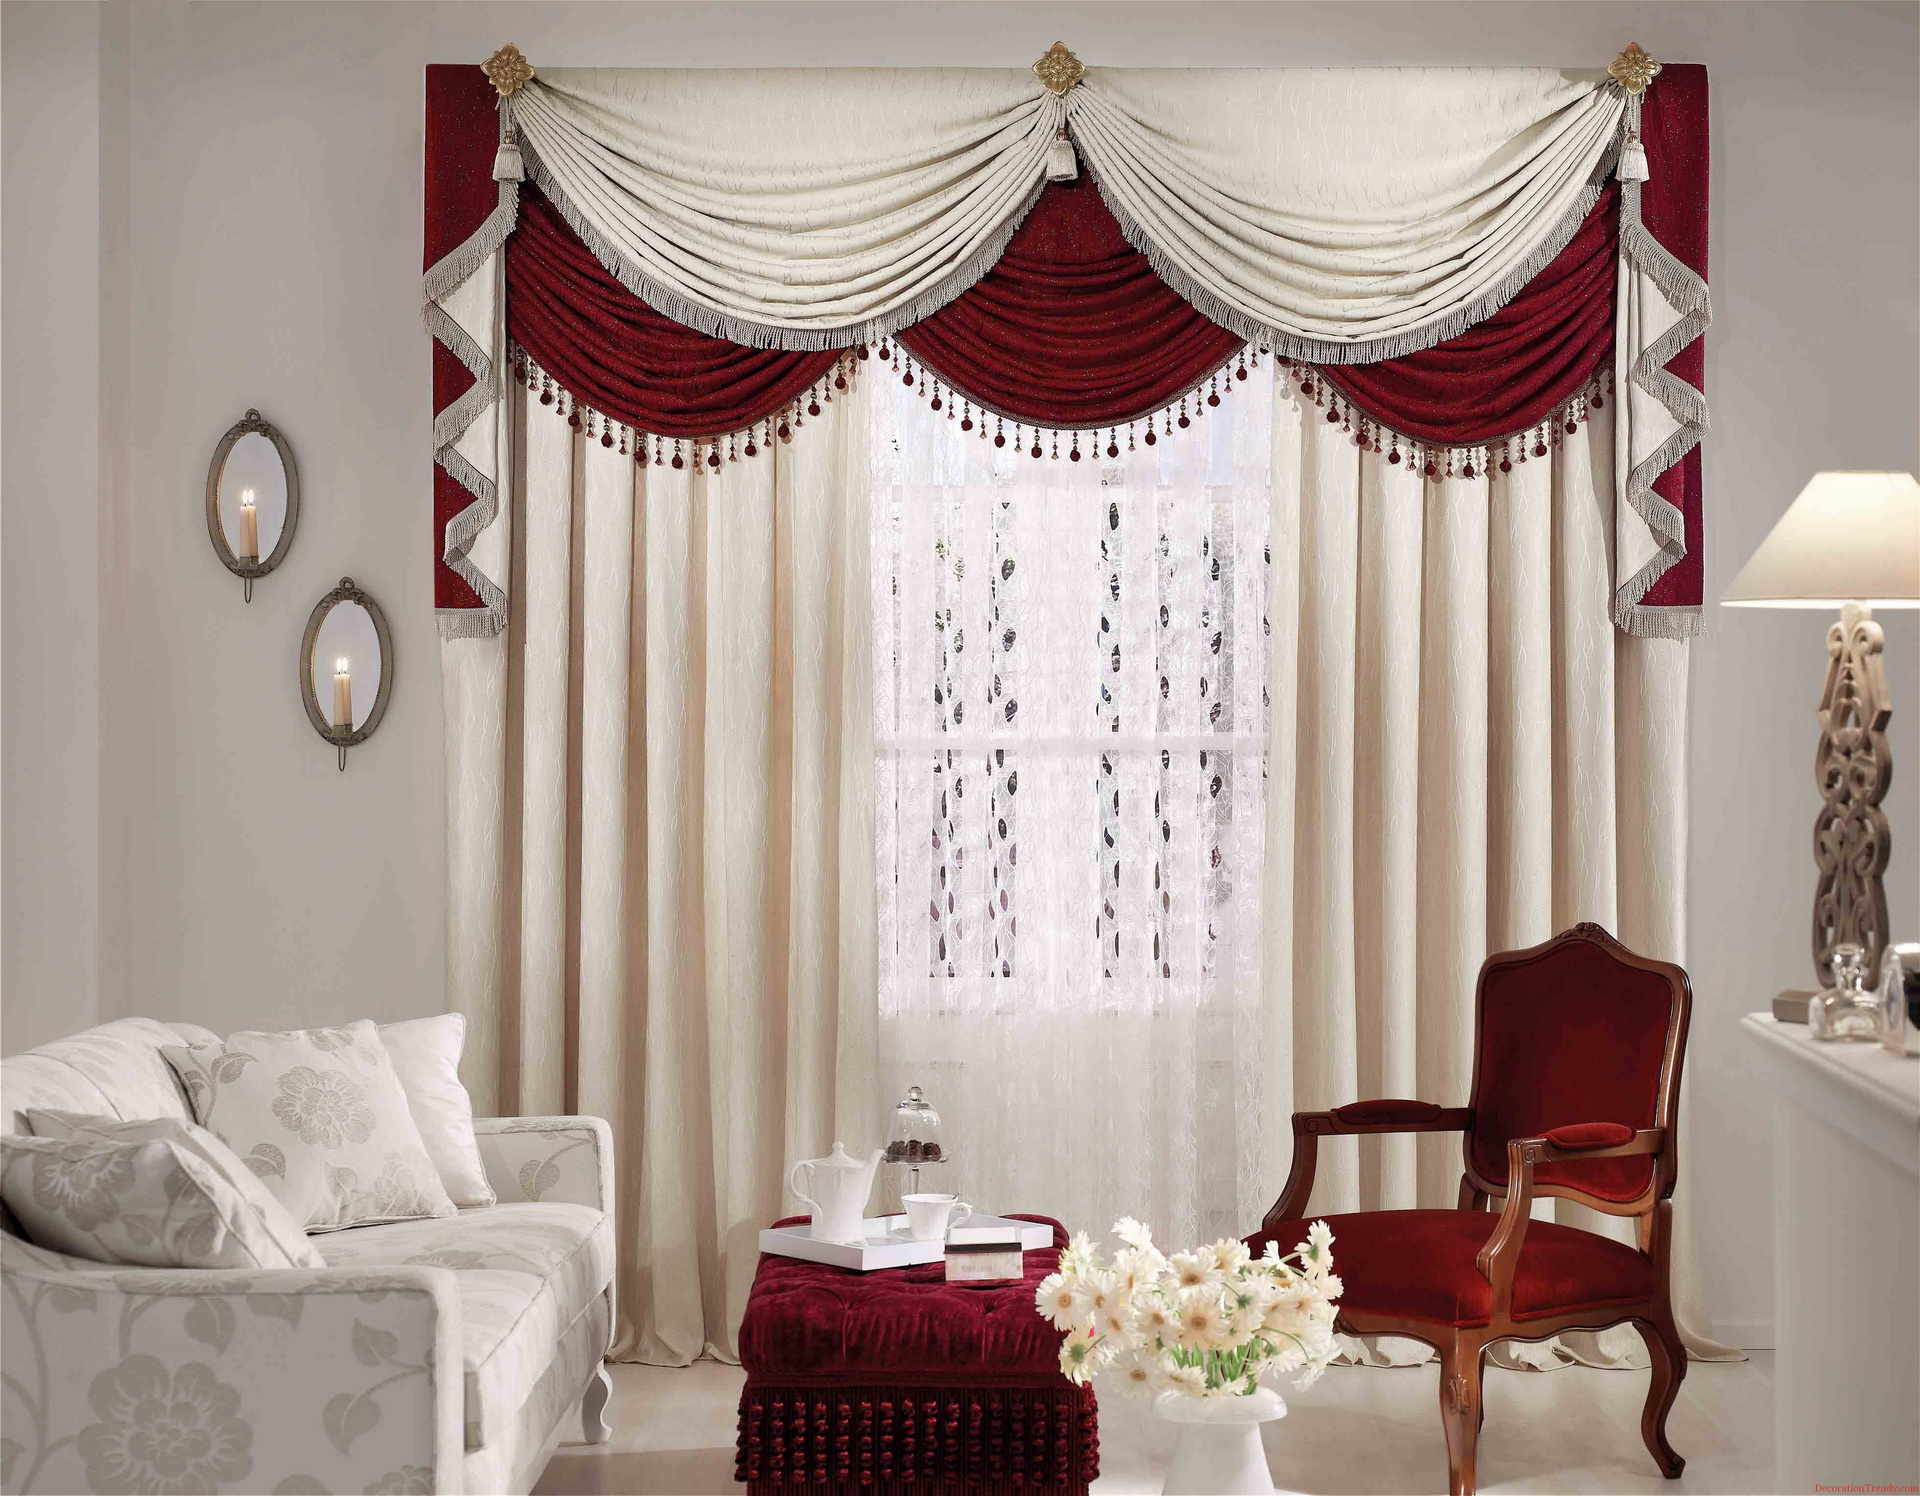 Living Room Curtains 41 By 60